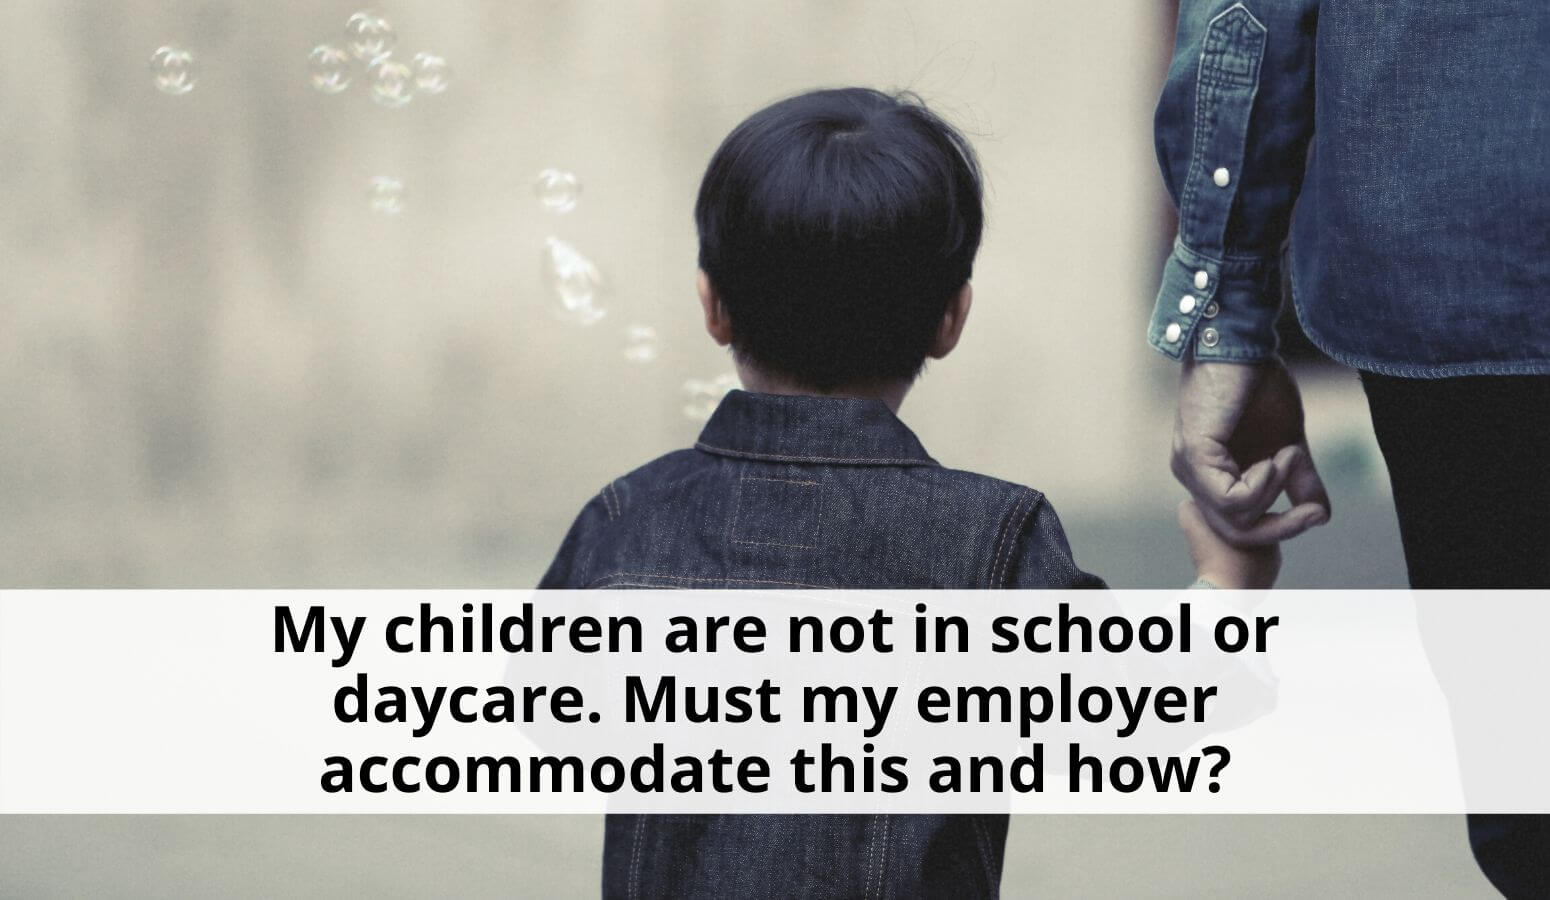 Featured image for “Parenting During COVID-19: Child Care Accommodation For Employees”